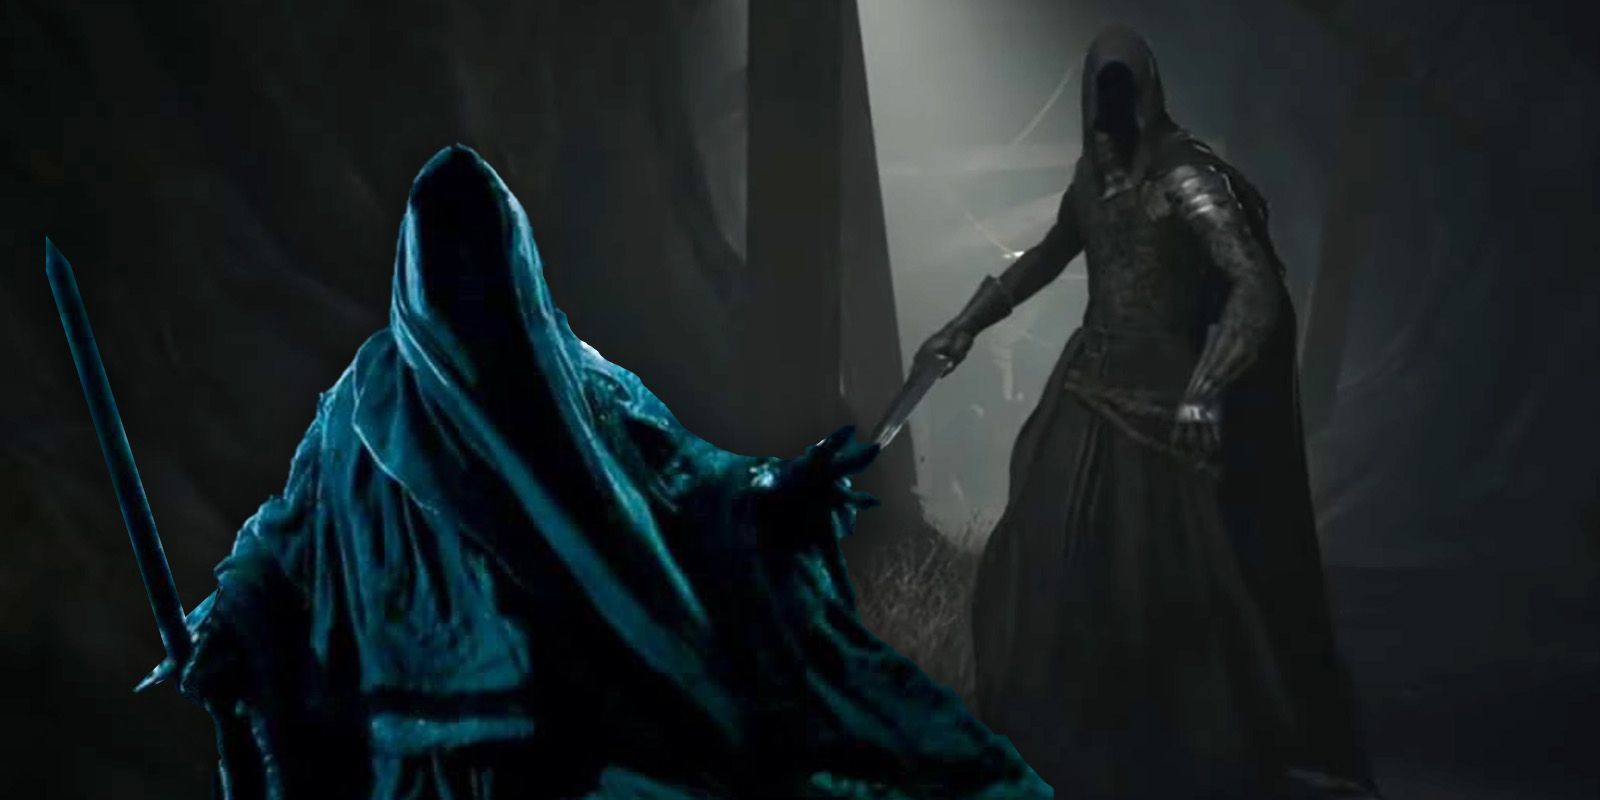 Image comparing the appearance of a Ringwraith from The Fellowship of the Ring to The Lord of the Rings Gollum.